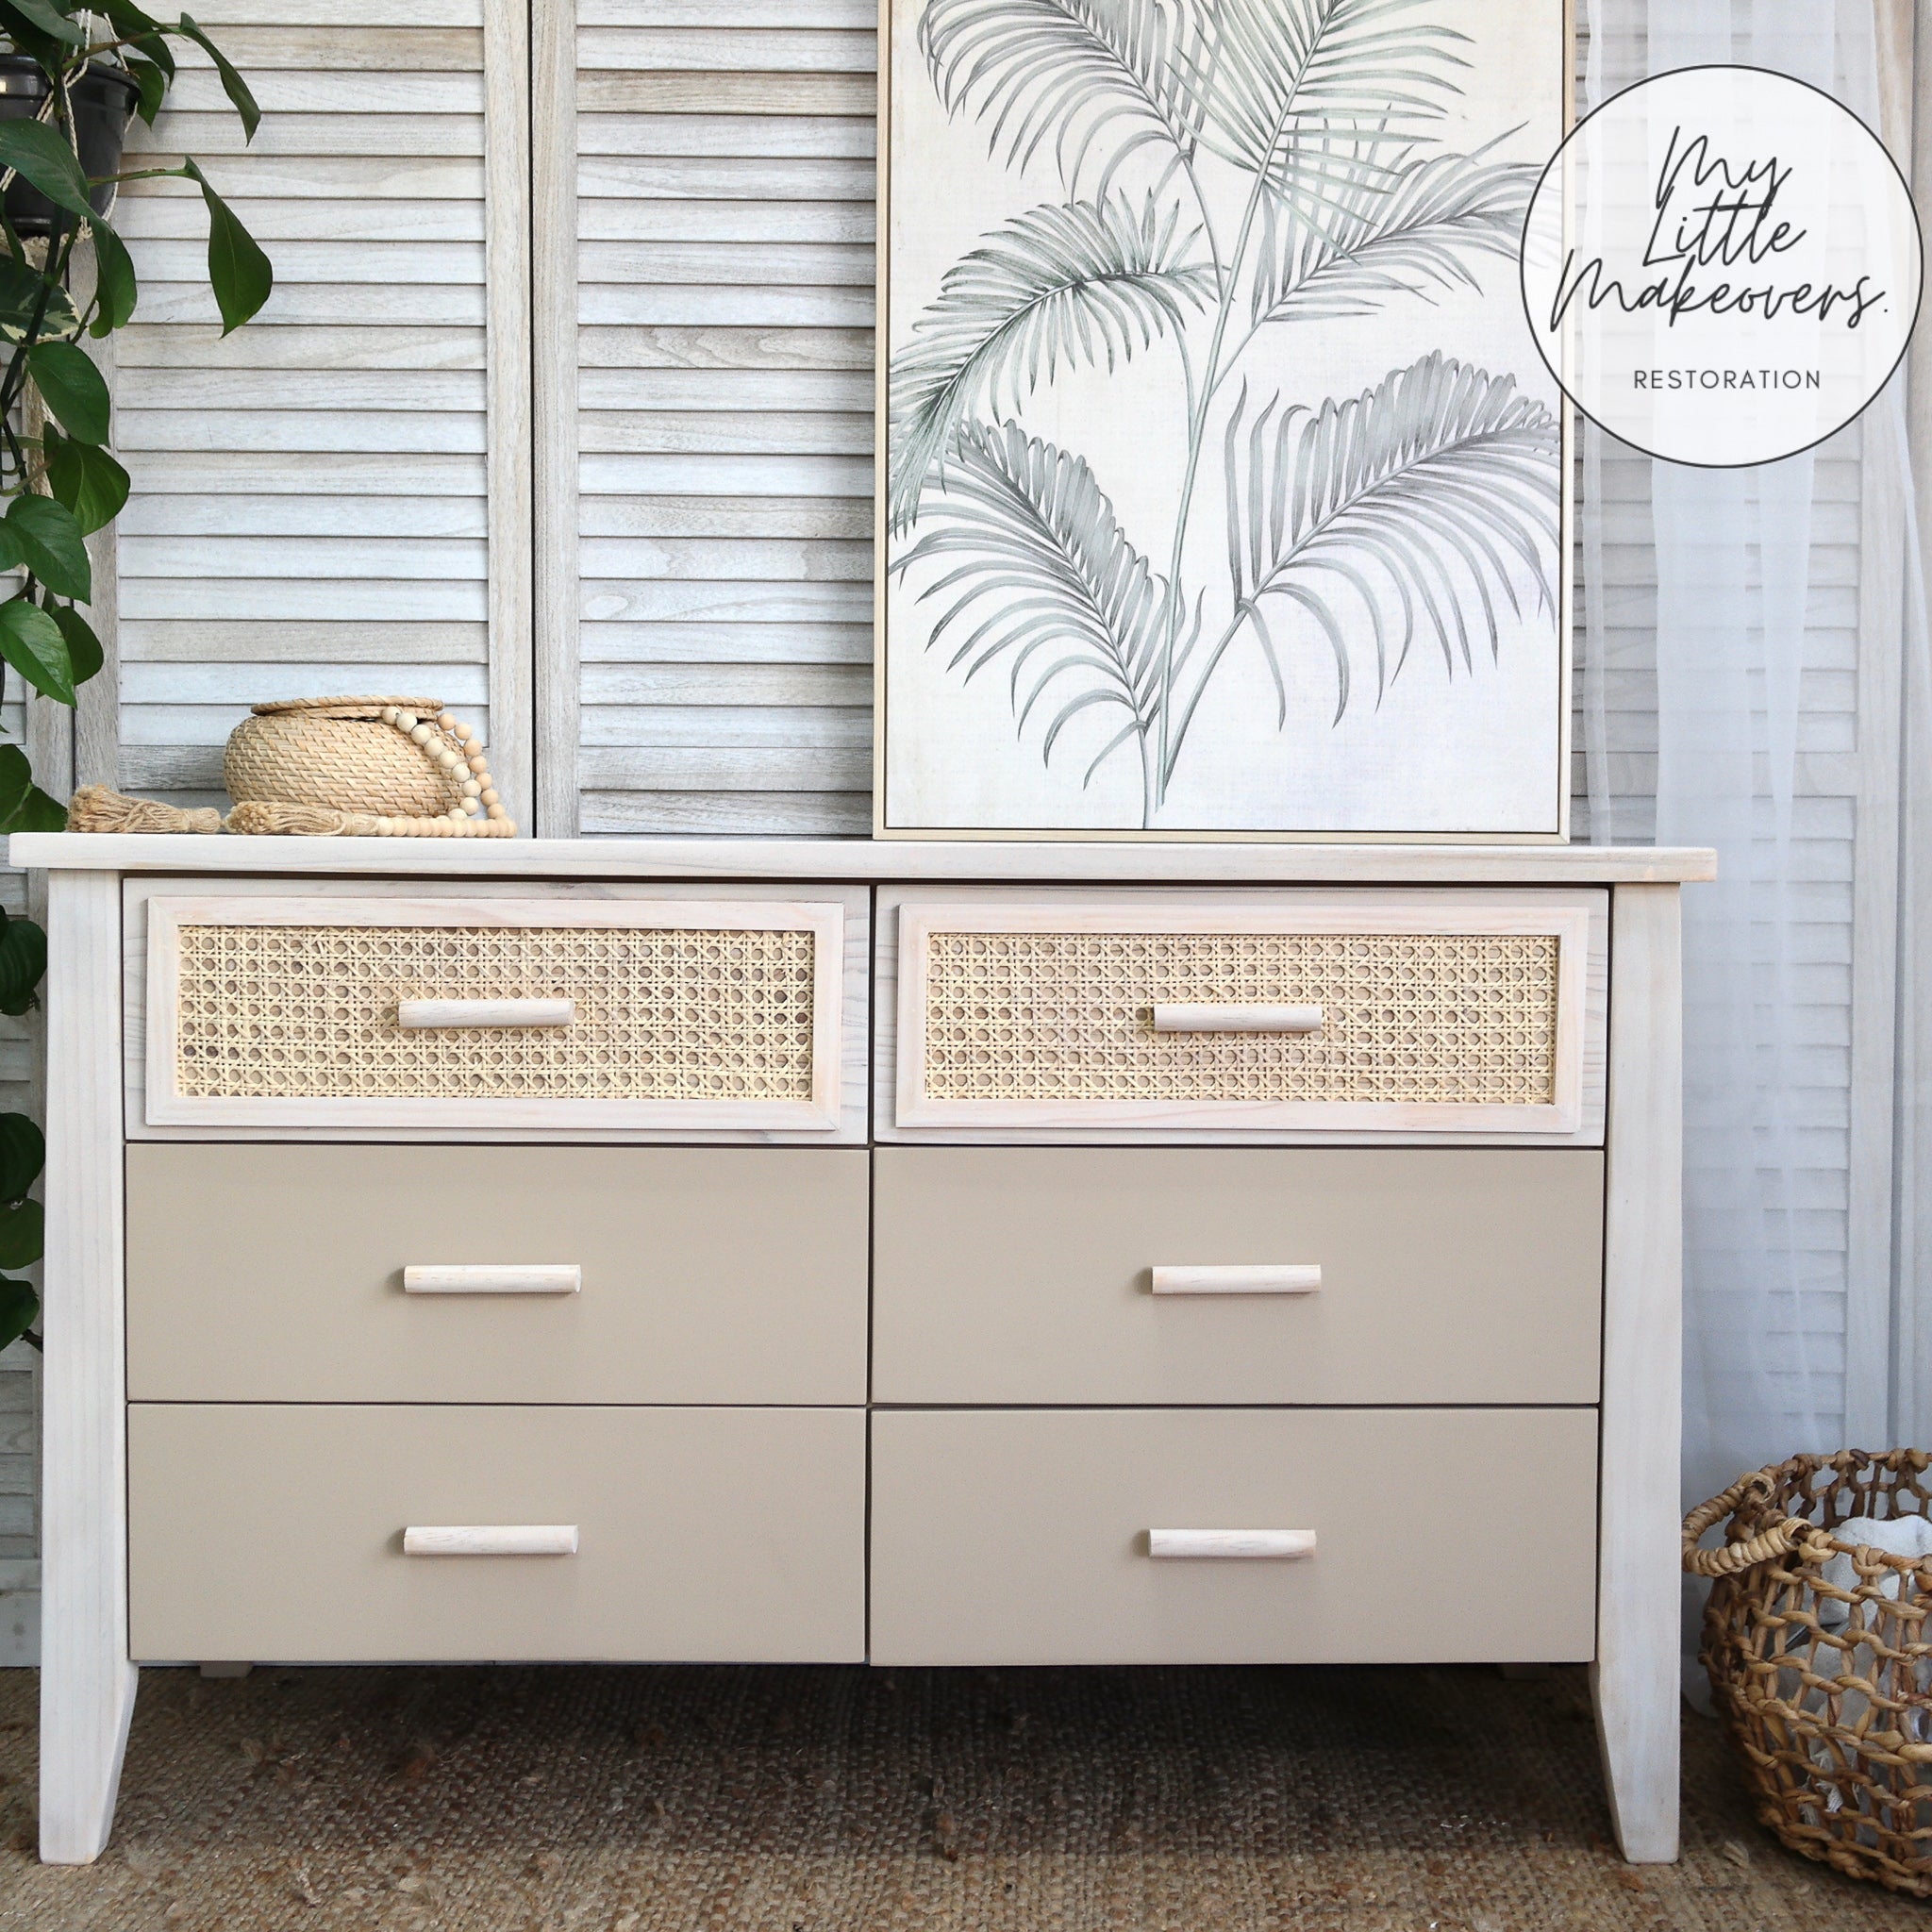 A mid-century 6-drawer dresser refurbished by My Little Makeovers Restoration has natural light wood and features Dixie Belle's Burlap chalk mineral paint on its bottom 4 drawers.